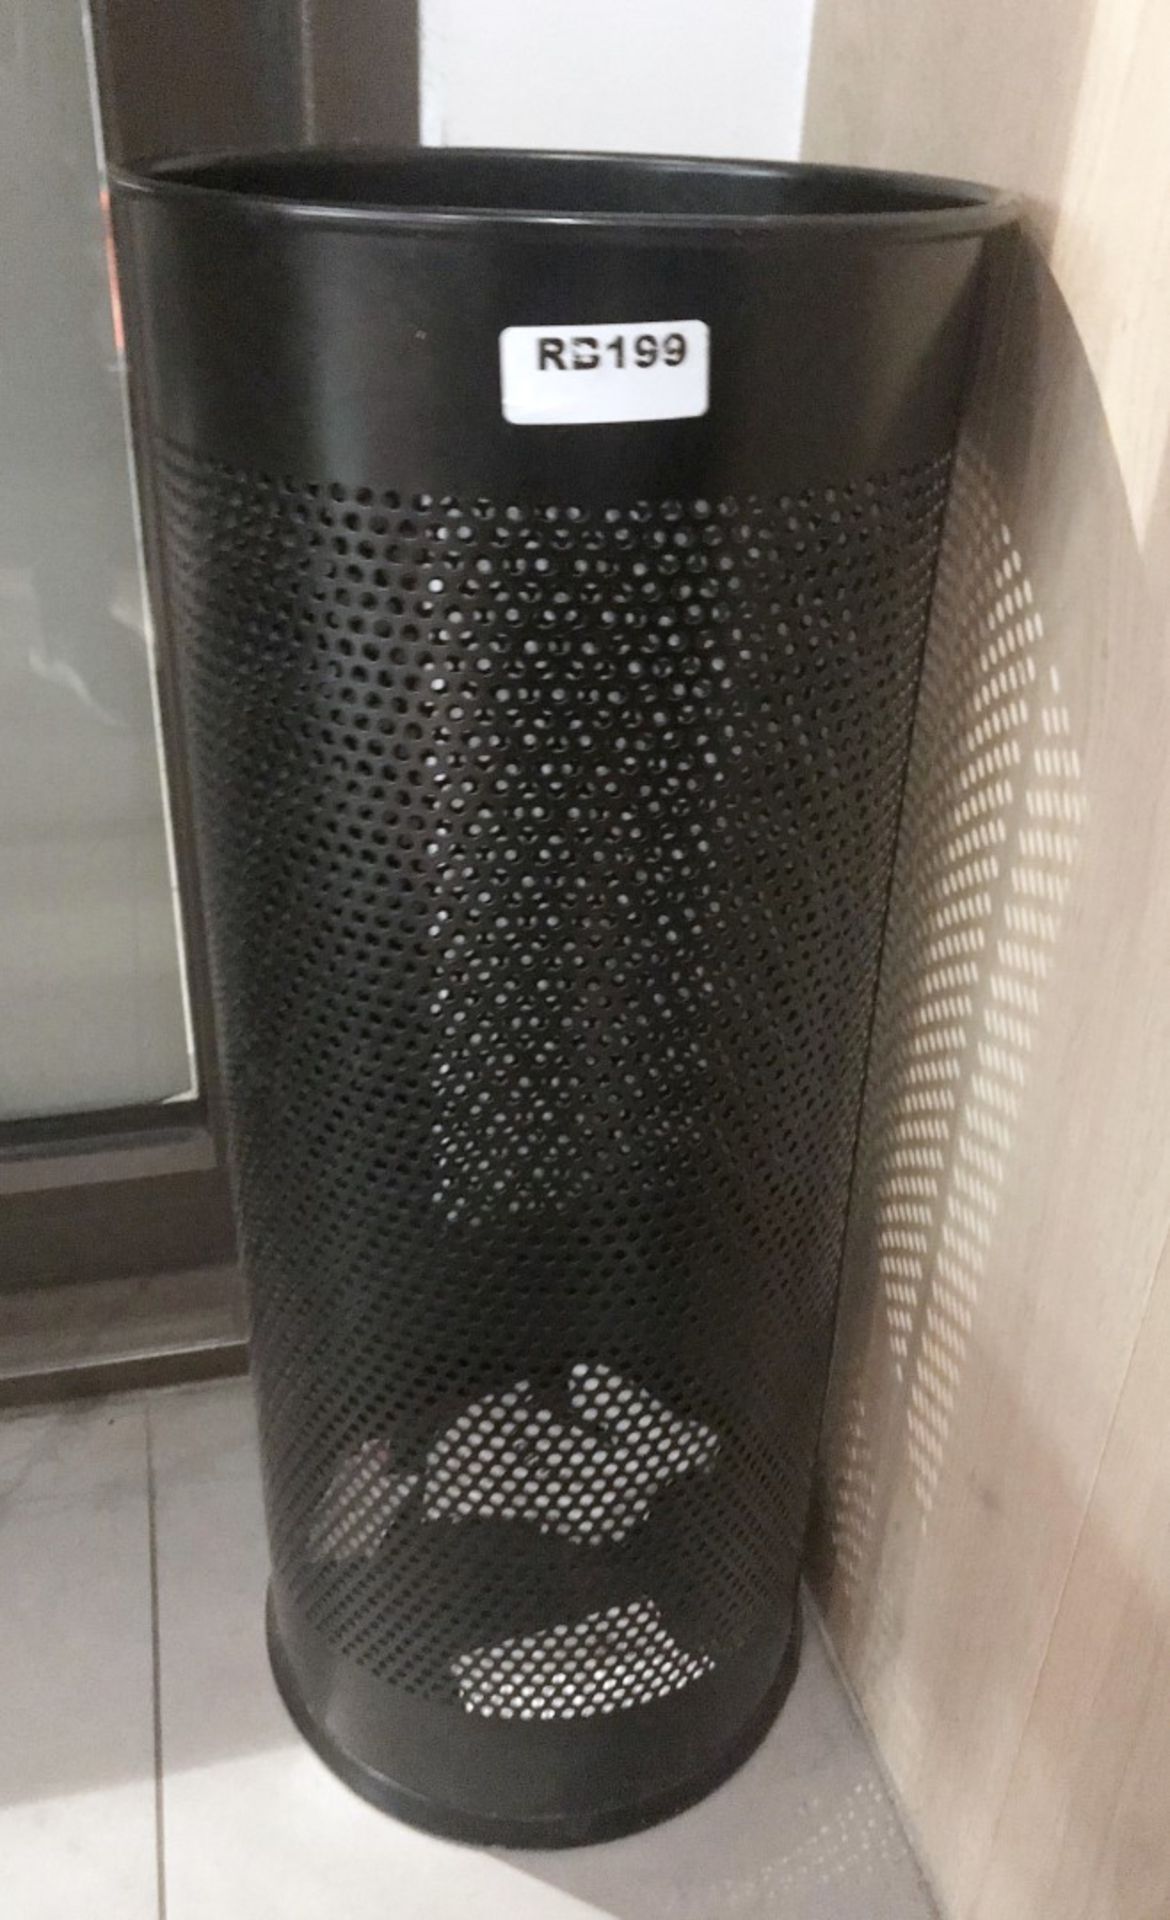 1 x Hailo Waste Bin, 1 x Mobile Waste Bin and 1 x Perforated Litter Bin - Ref RB199 - CL584 - - Image 2 of 3